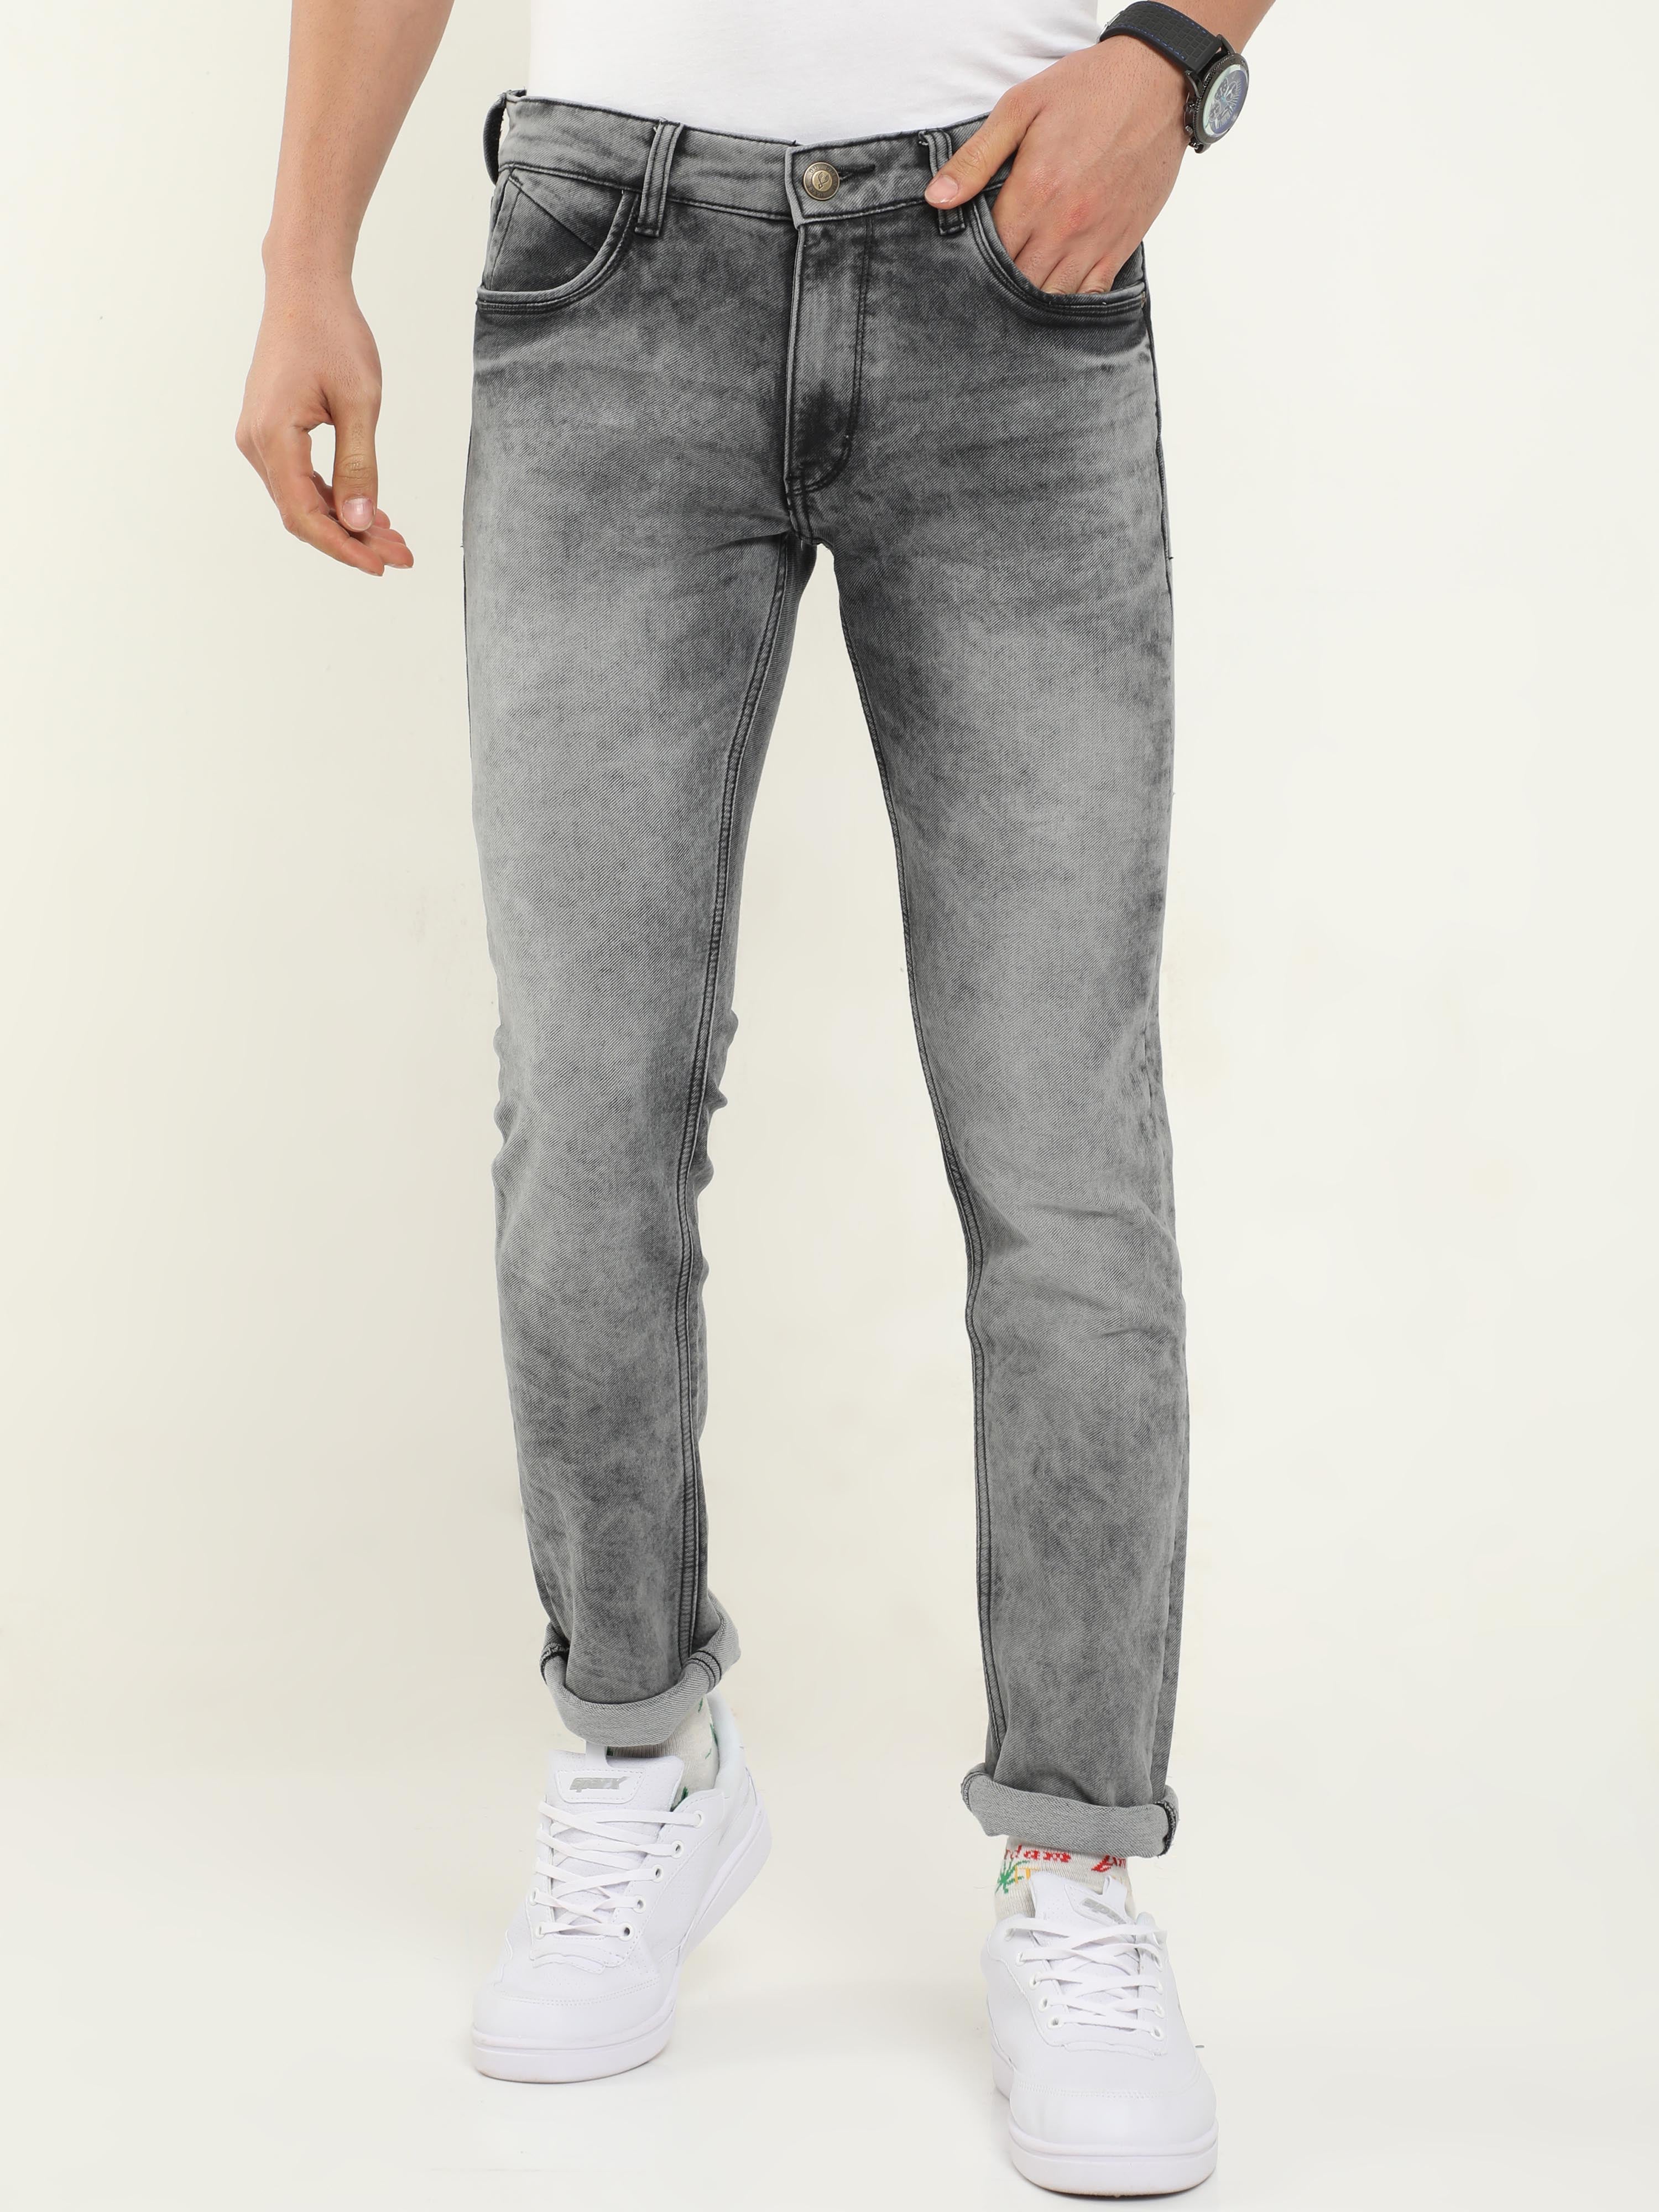 Onfire Grey Skinny Jeans - A1591A